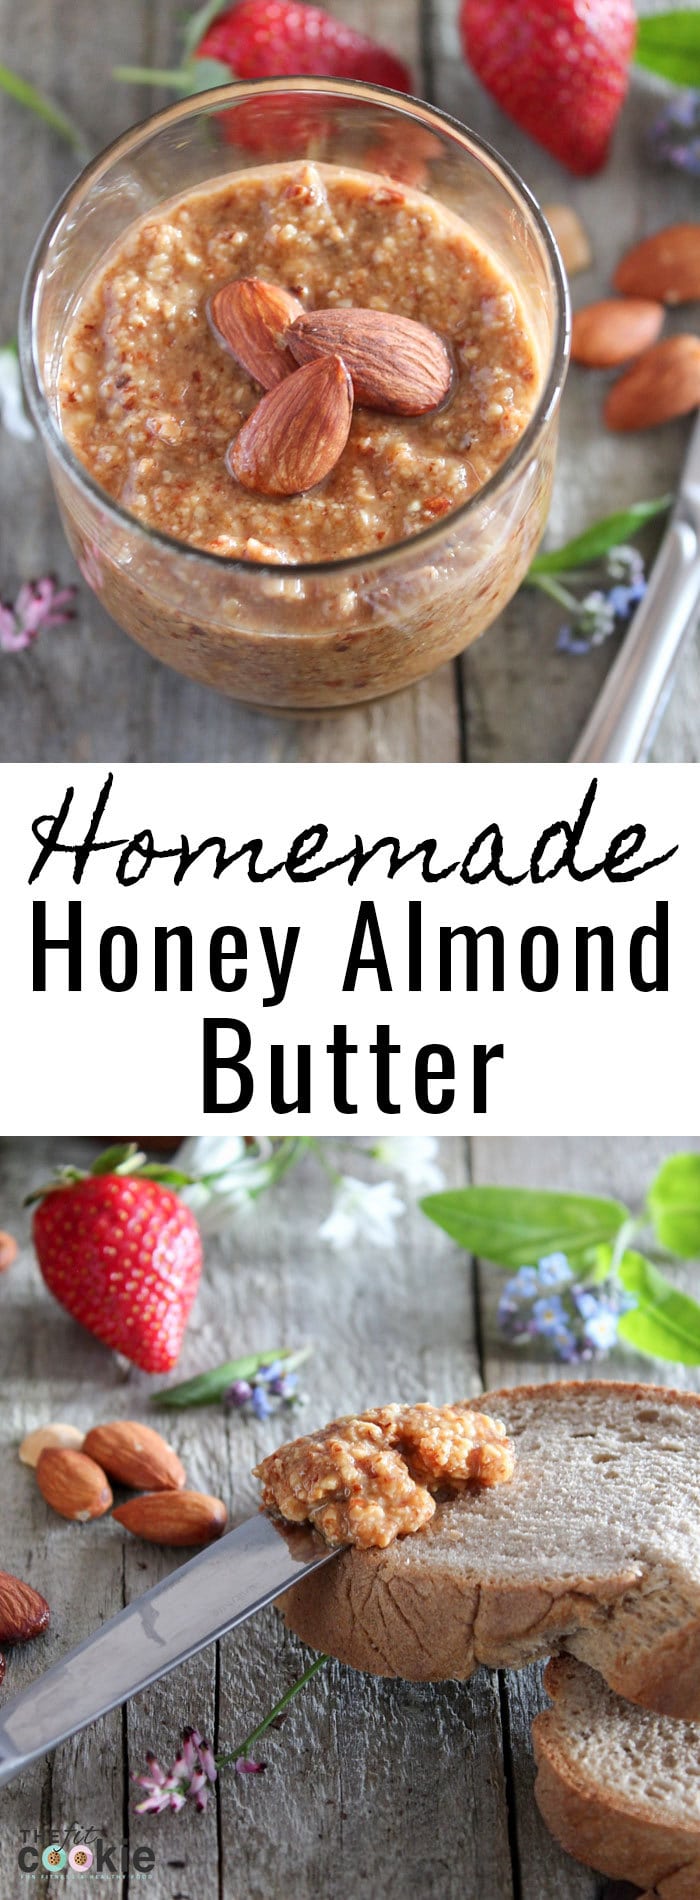 Step aside, peanut butter, this Homemade Honey Almond Butter is perfectly delicious! Crunchy, salted, roasted almond spread made with a sweet hint of honey, and it's naturally gluten free and paleo - @TheFitCookie #recipe #paleo #glutenfree